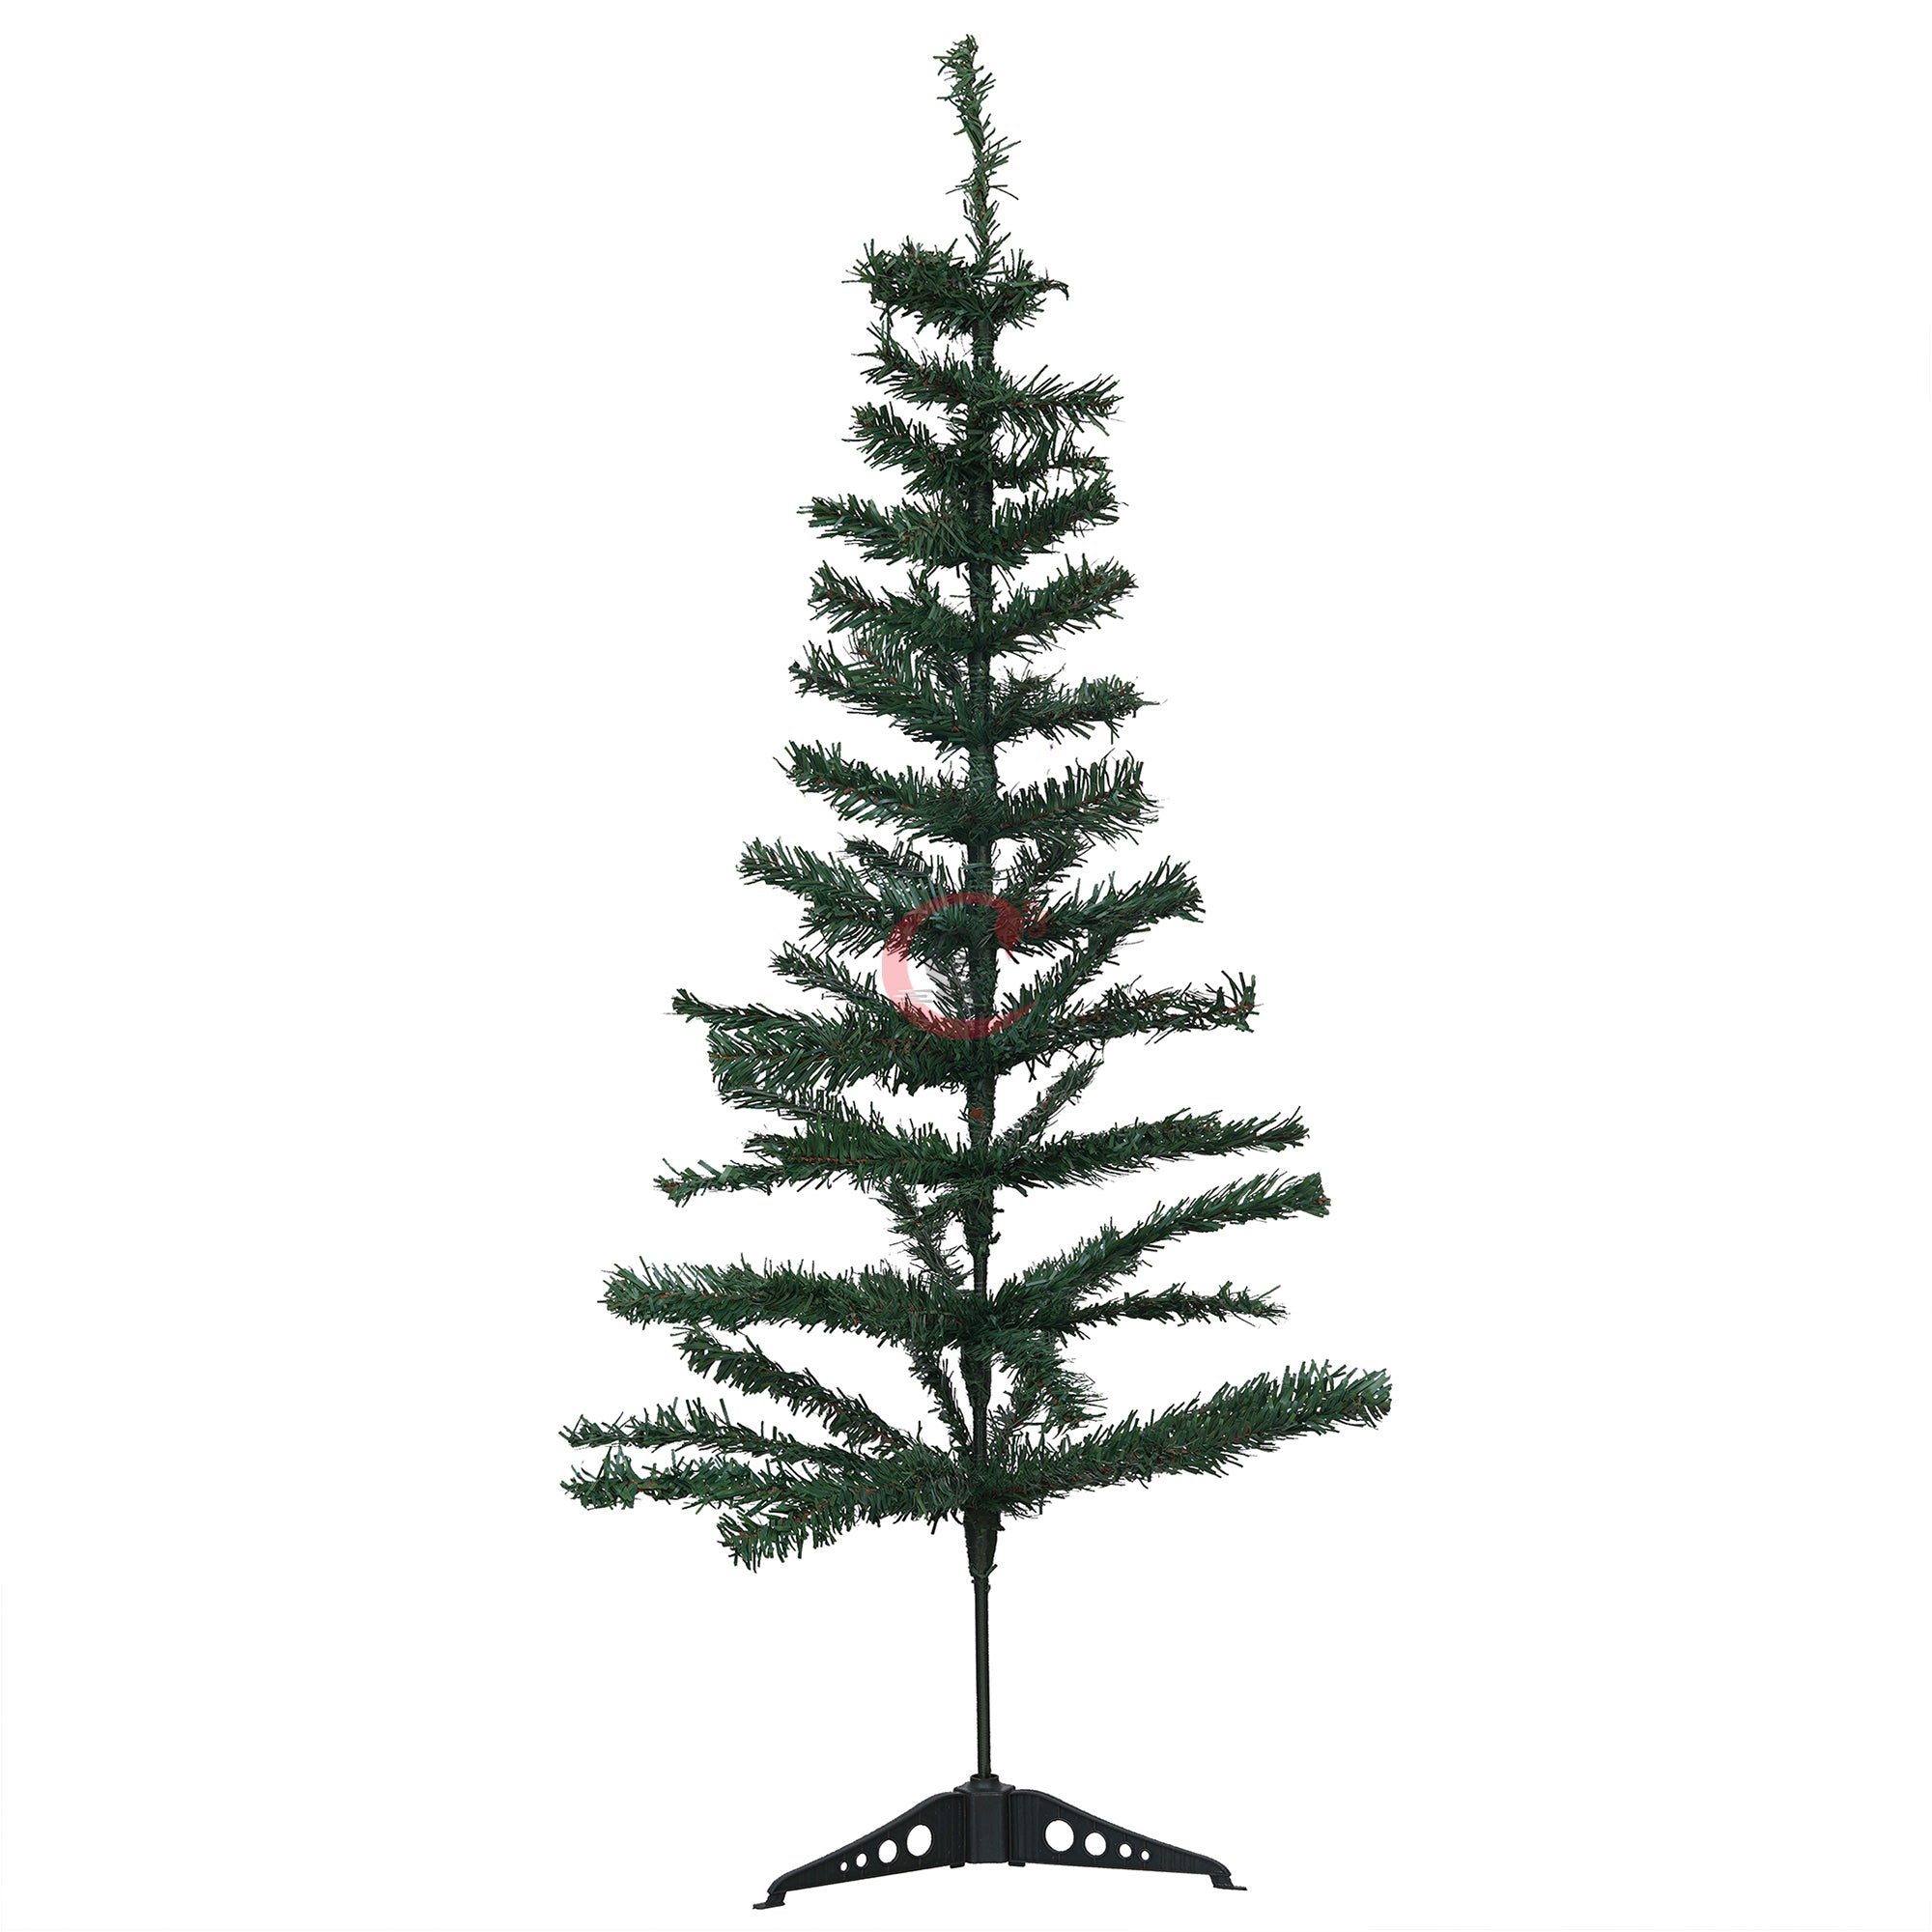 eCraftIndia 4 Feet Green Artificial Christmas Tree Xmas Pine Tree with Metal Stand - Xmas Tree for Indoor, Outdoor, Home, Living Room, Office, Church Decor - Merry Christmas Decoration Item… 6